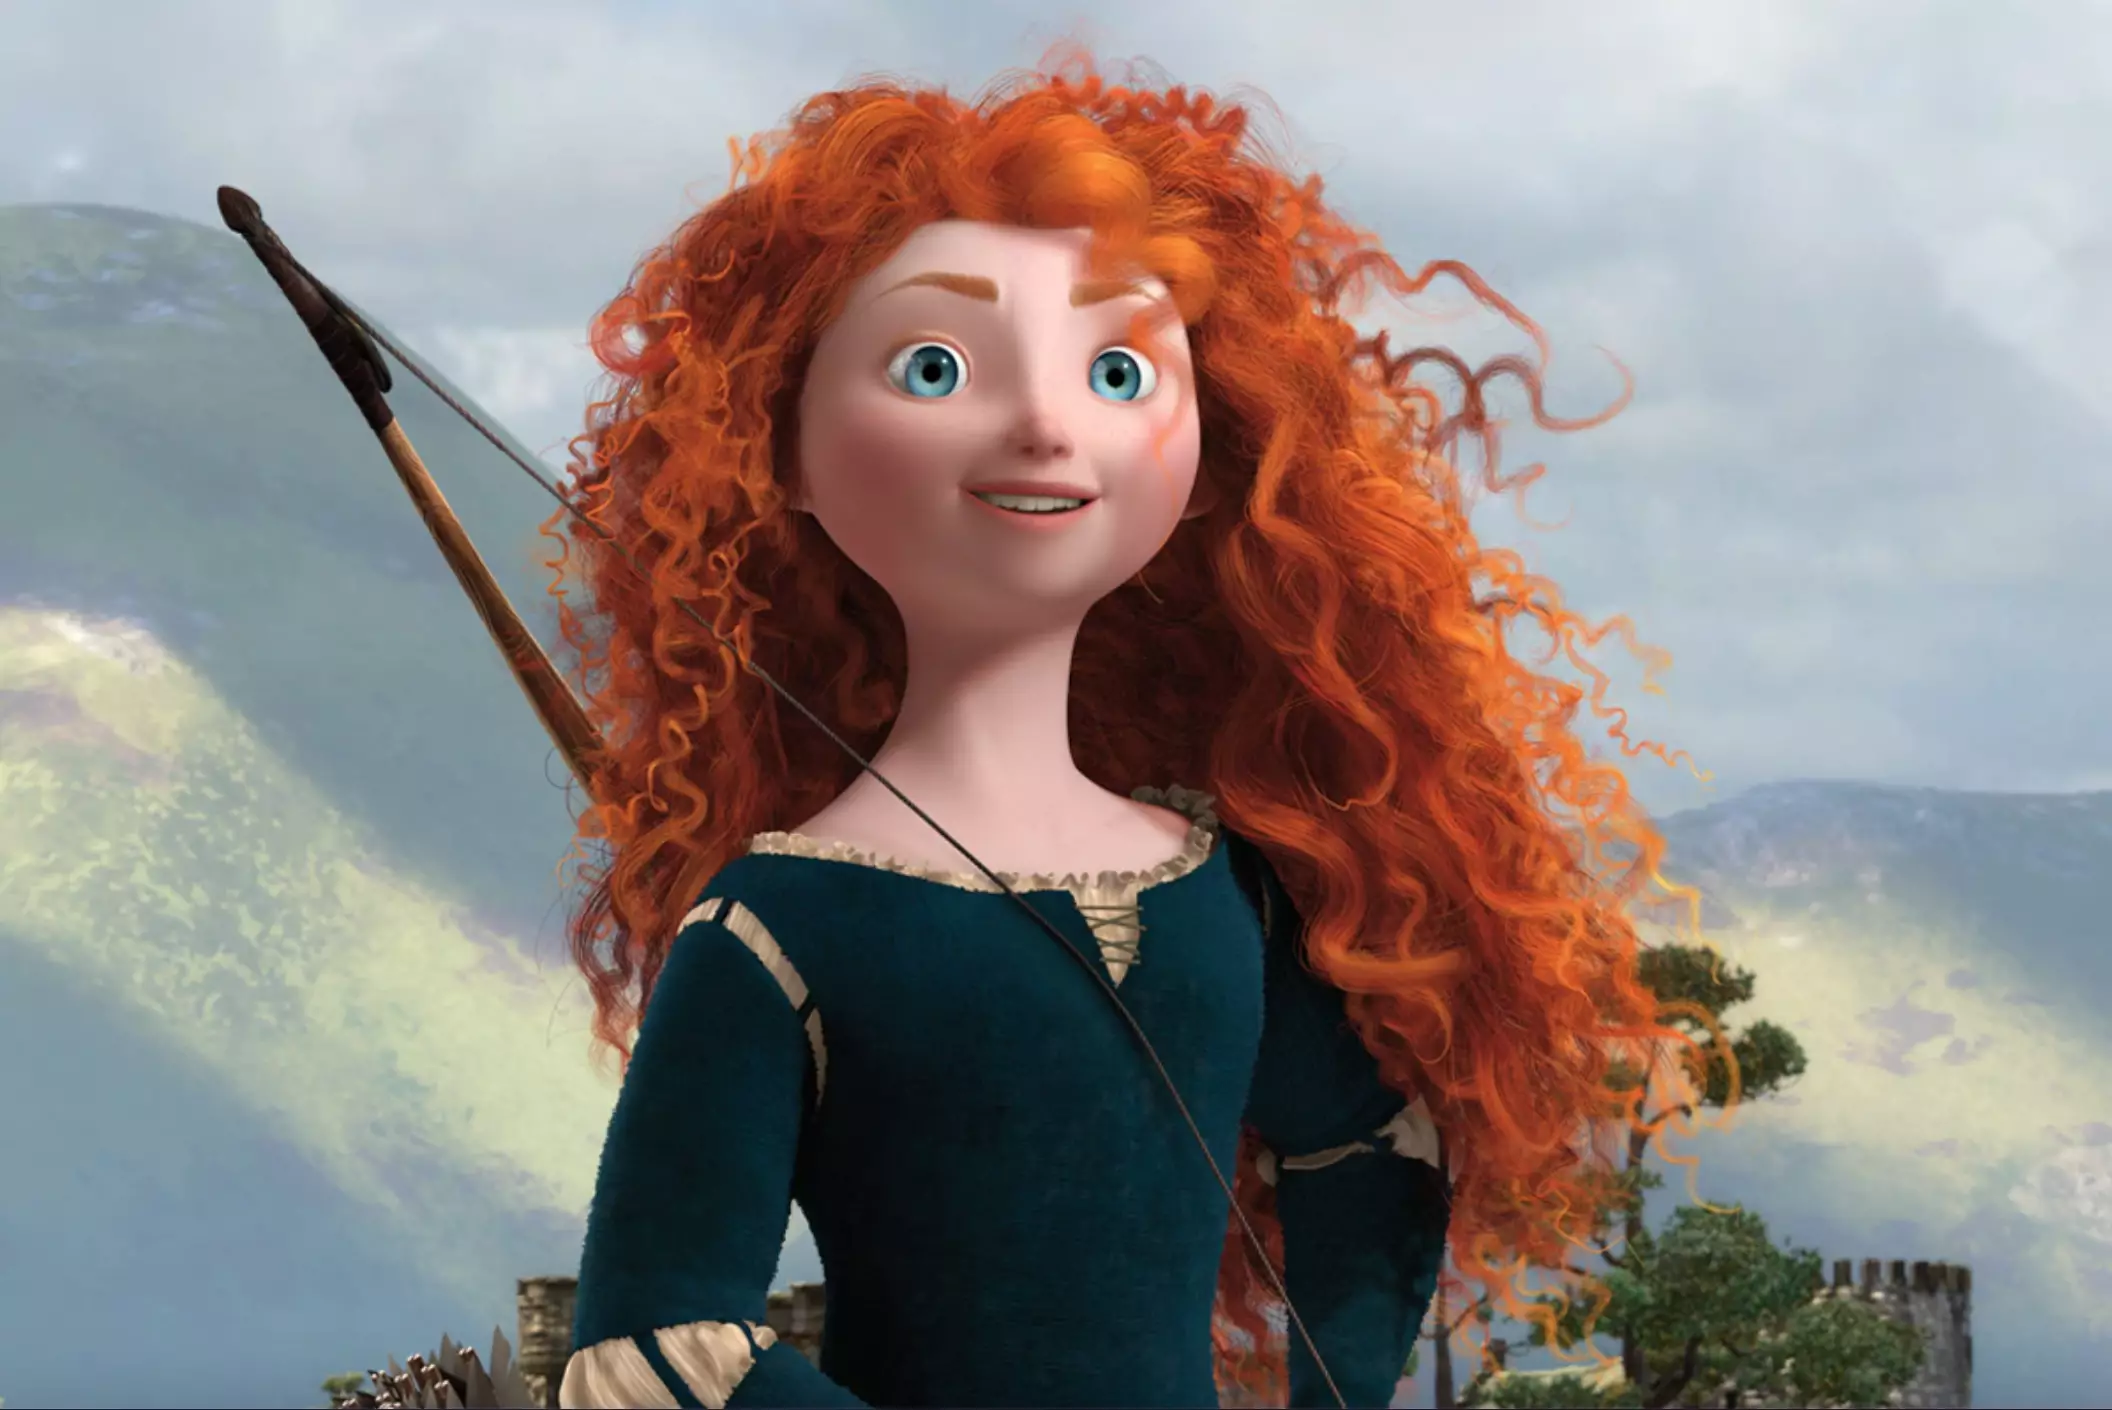 Brave was released in 2012 (